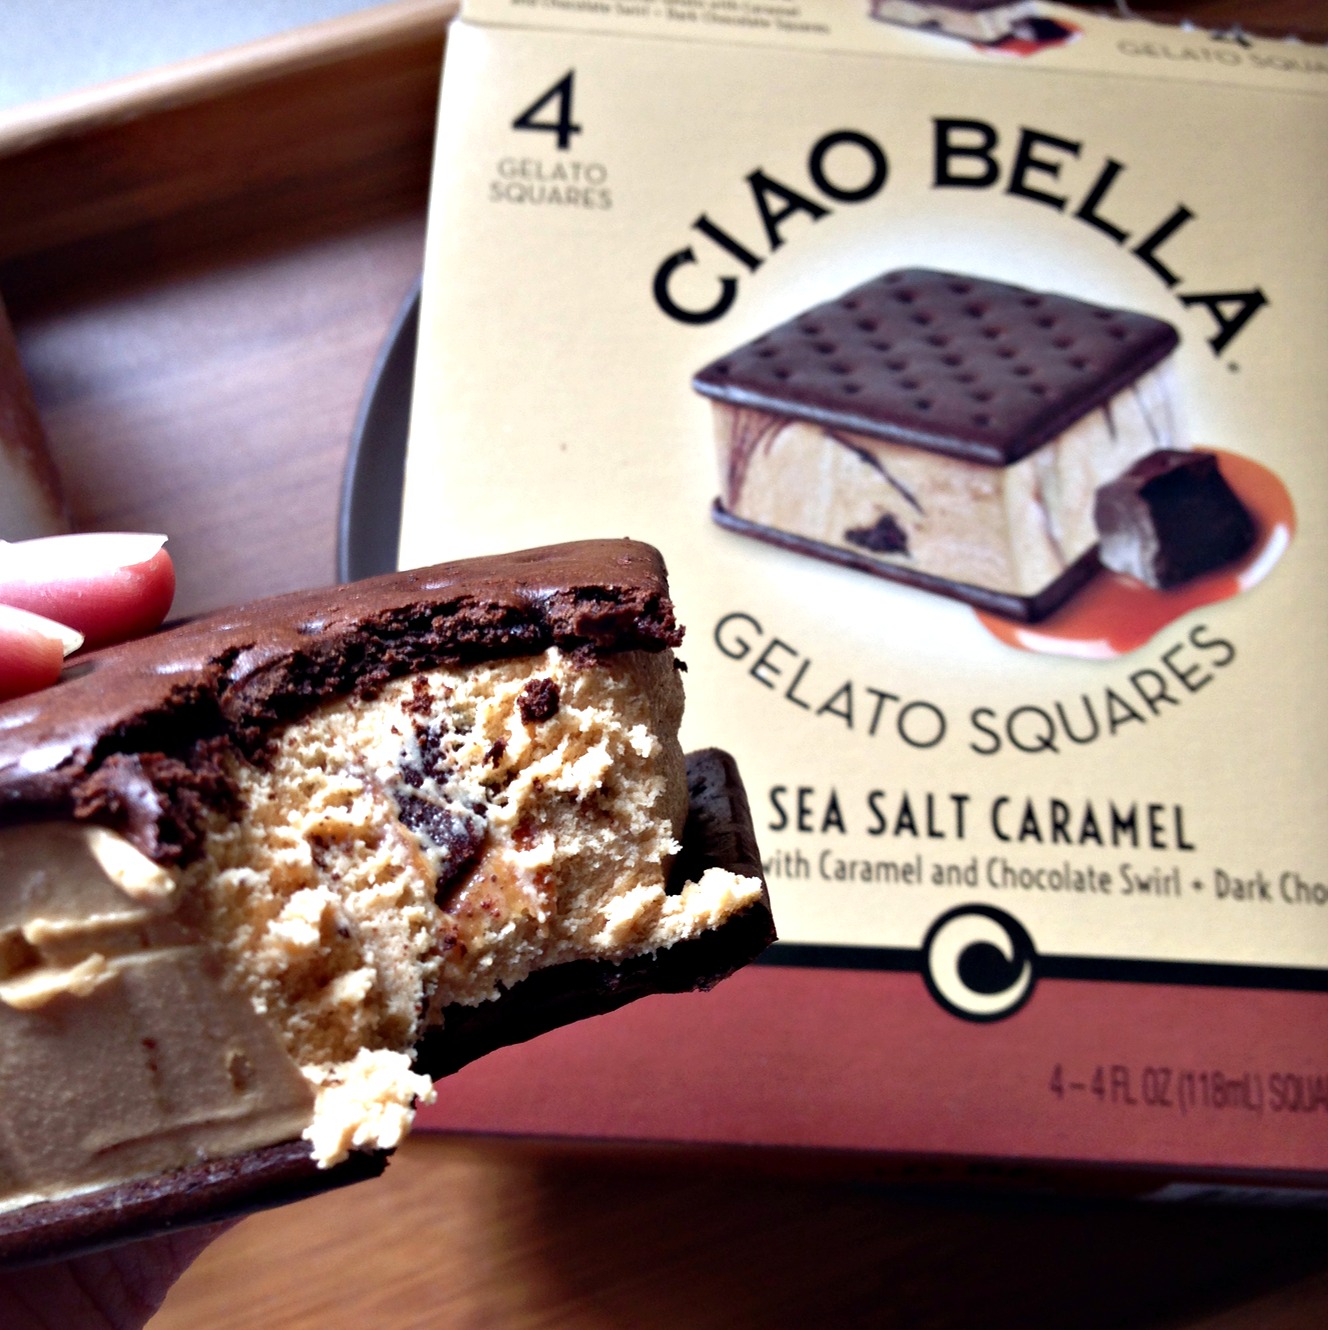 Ciao Bella Gelato Squares - Sweet Treats You Won't Feel Guilty Eating